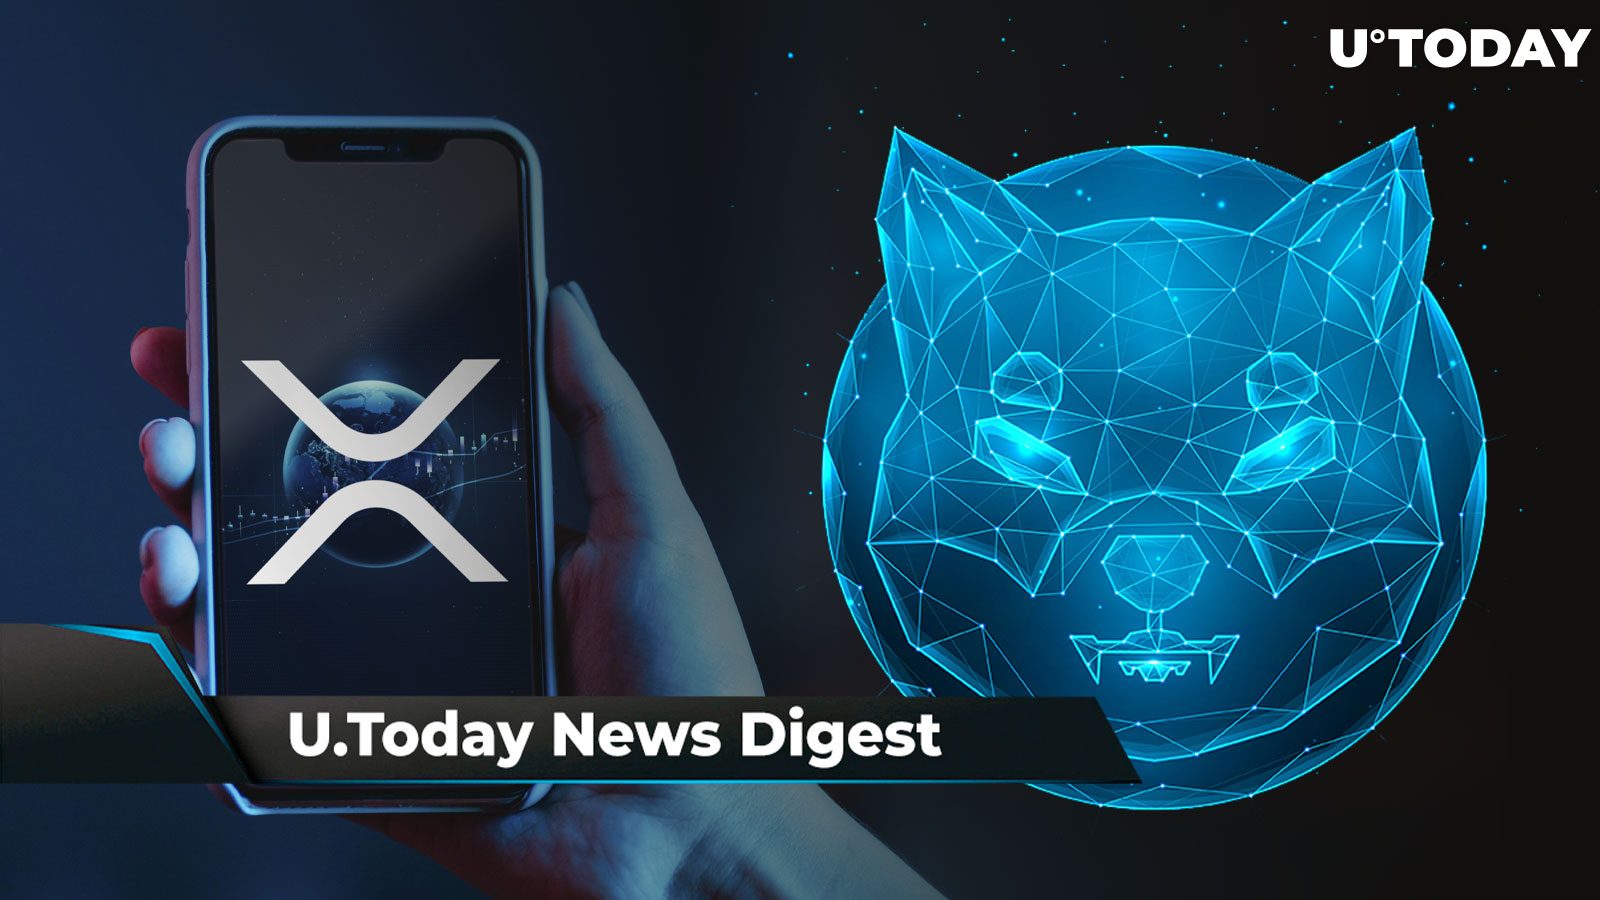 XRP Trading Volume up 1,500%, 847.9 Billion SHIB Moved as Influencer Shows Support, Goldman Sachs Classifies XRP, SHIB and Other Coins: Crypto News Digest by U.Today